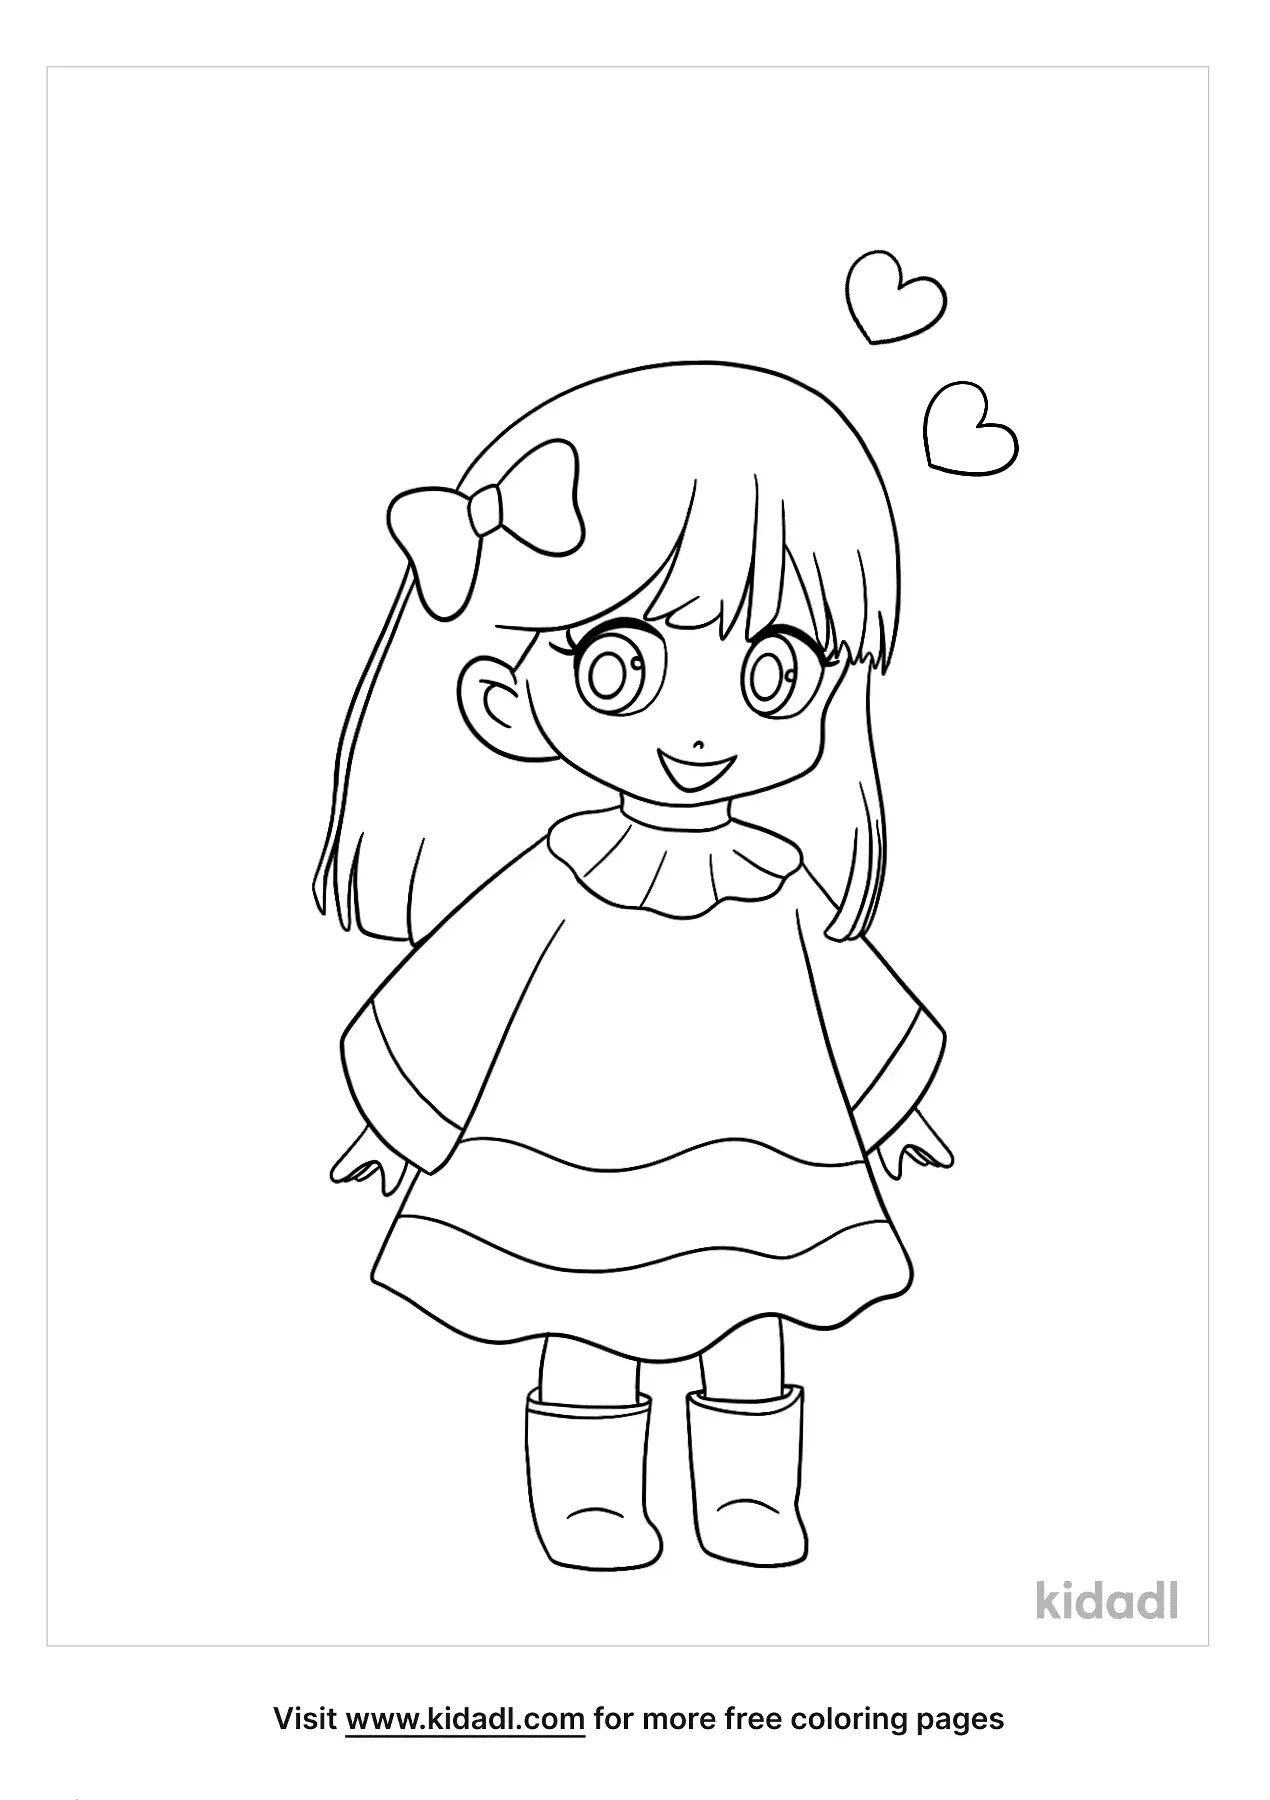 Cute Anime Chibi Elsa Coloring Pages  Get Coloring Pages